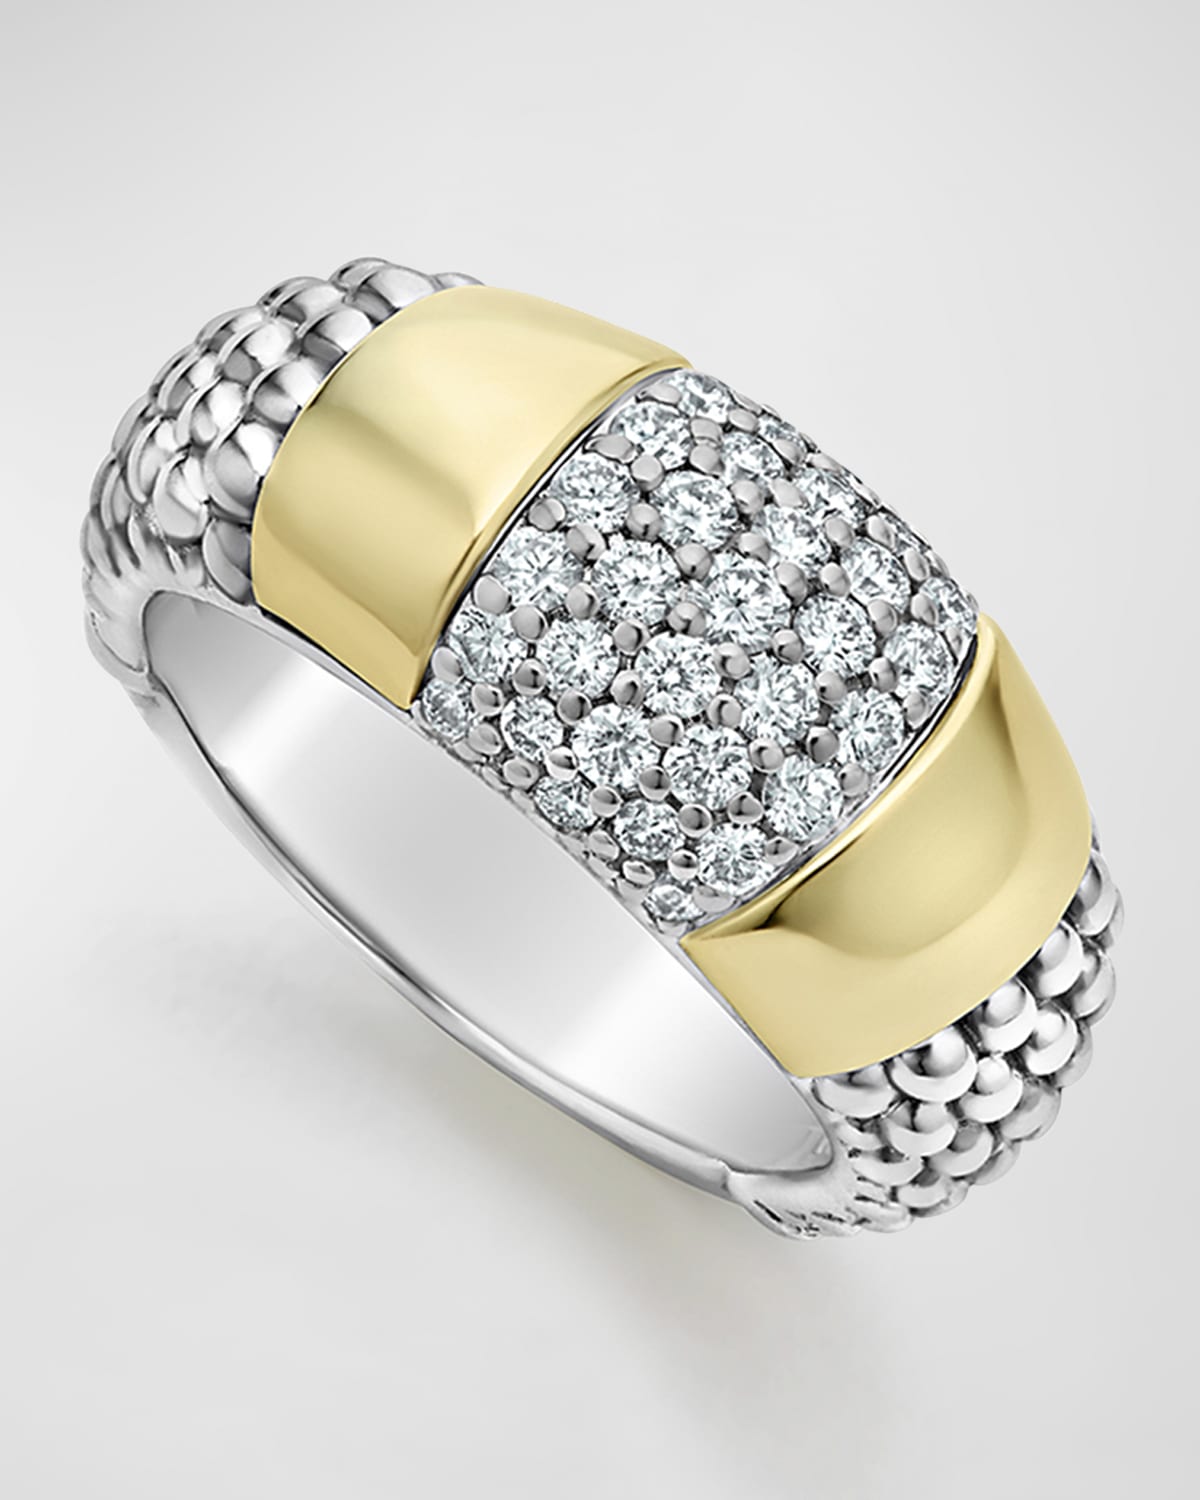 Diamond and Smooth Station Ring in 18K Gold with Sterling Silver Caviar Beading